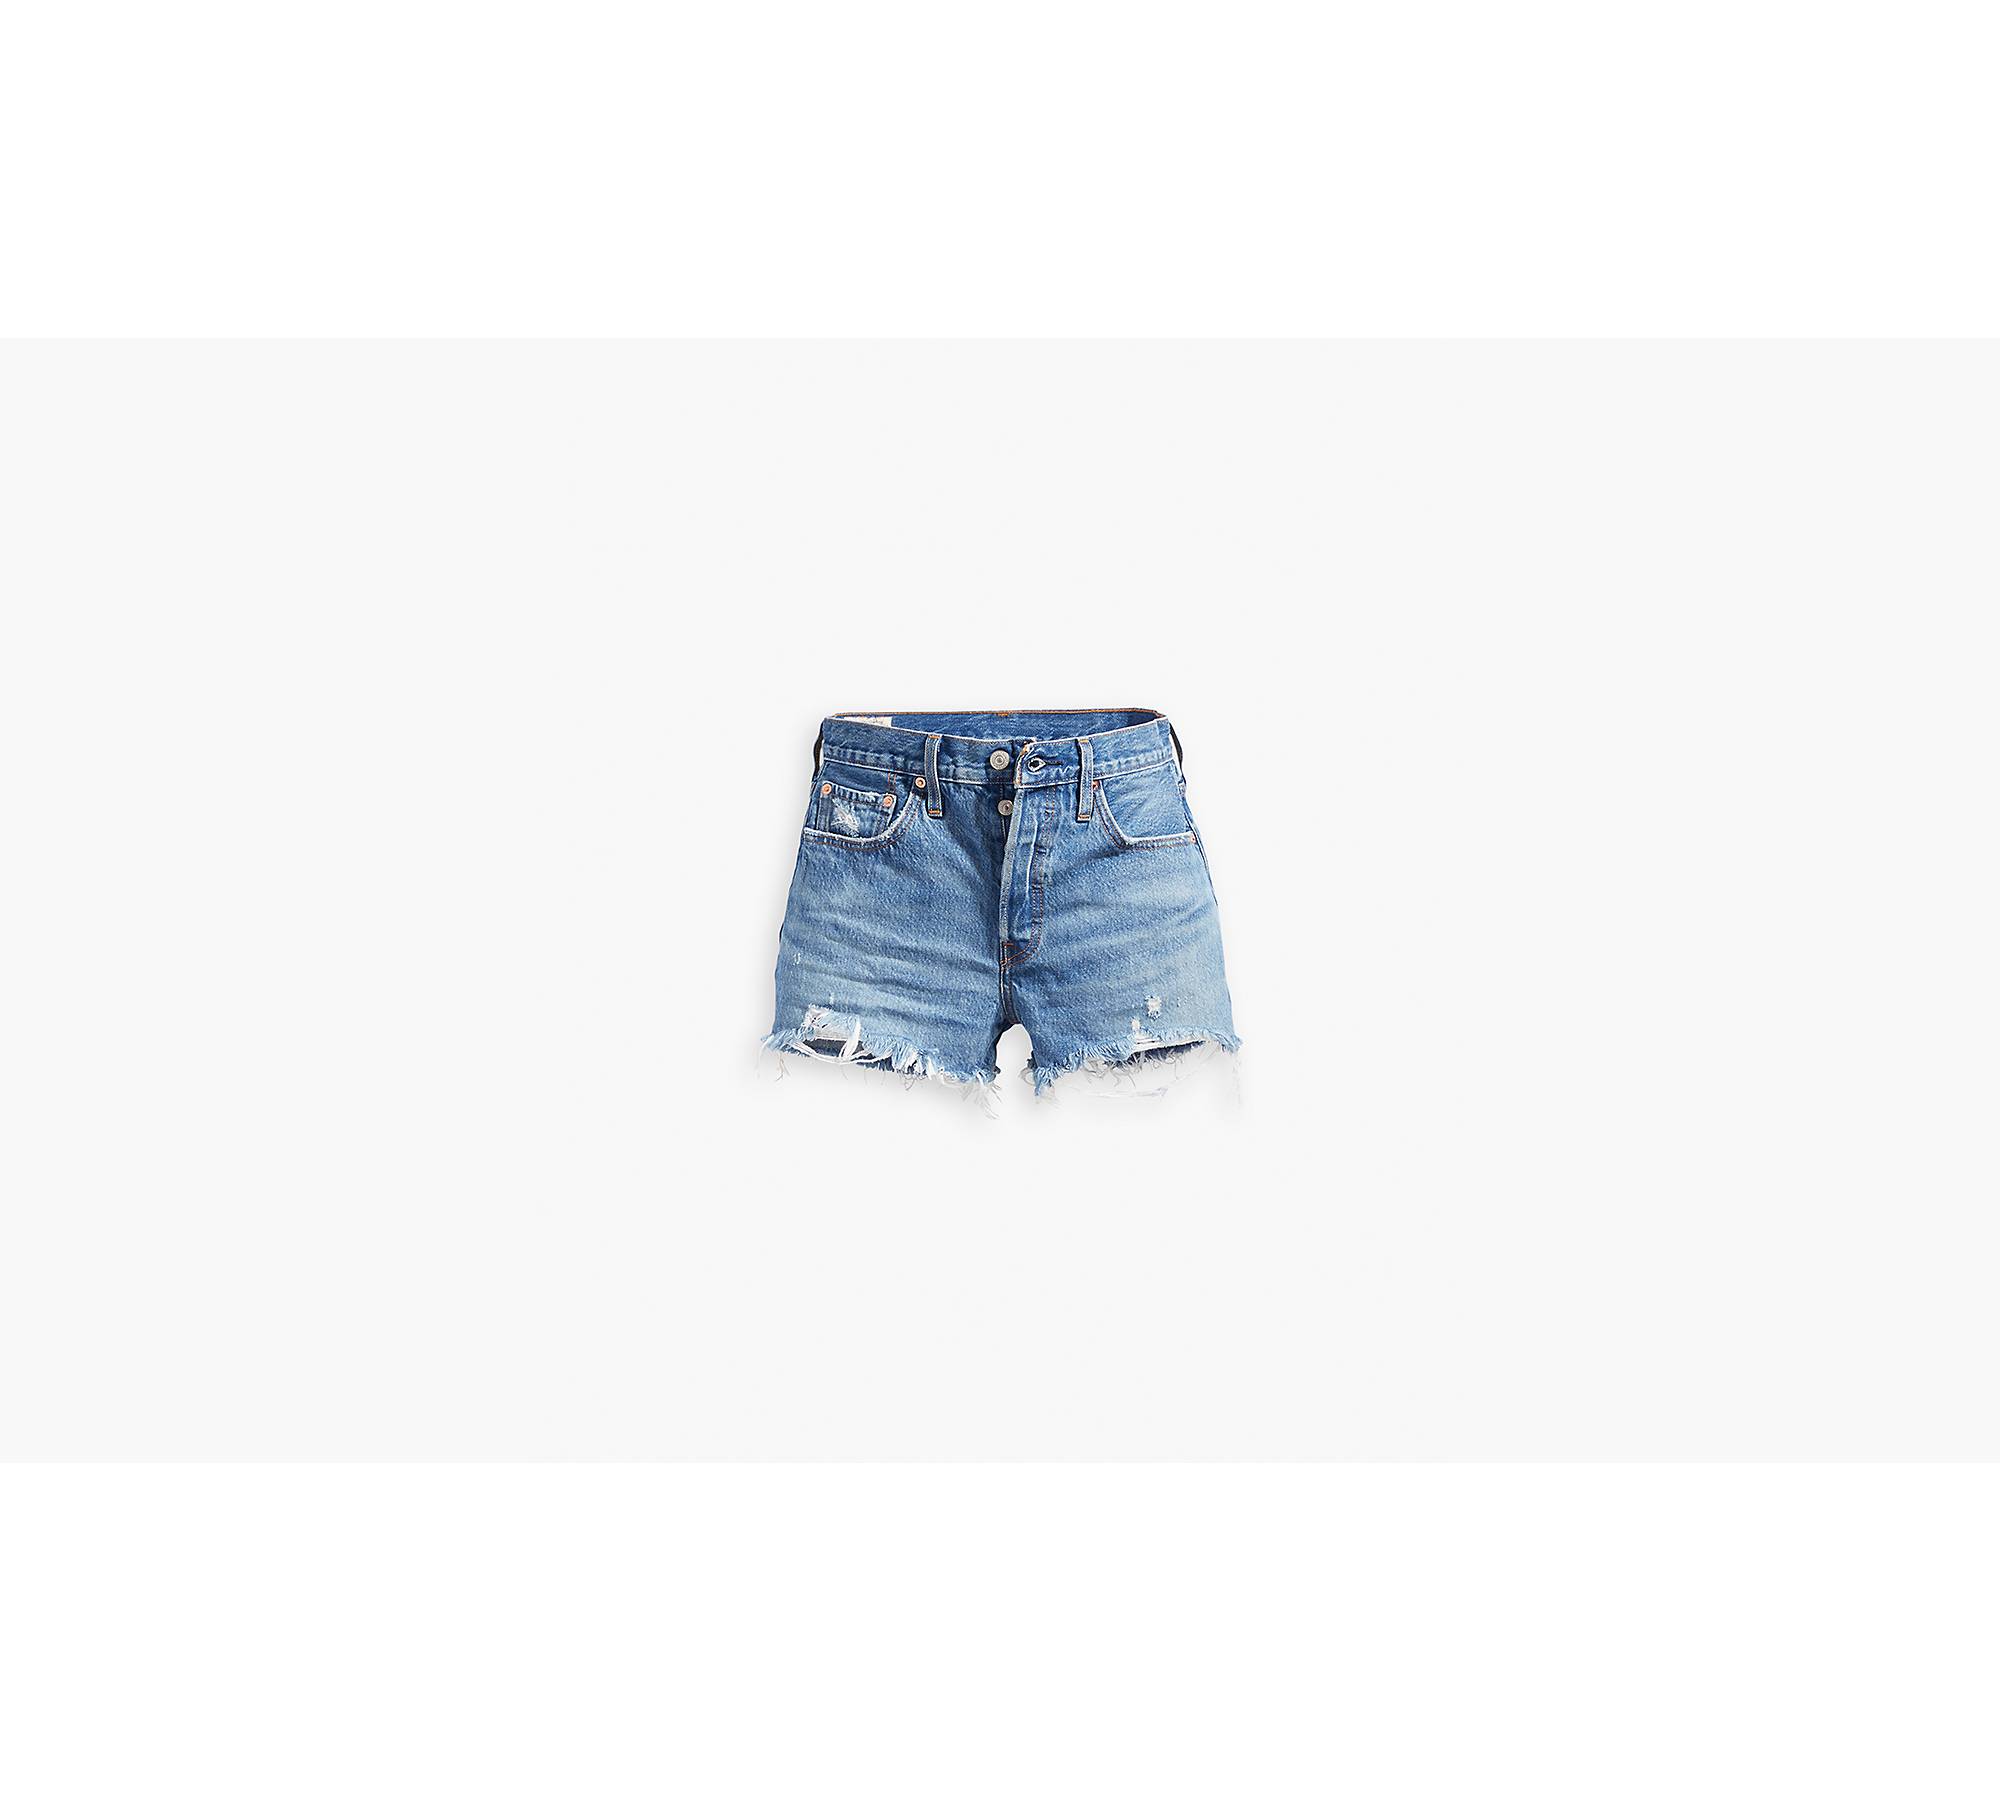 Booty Sexy Shorts For Women Vintage Jeans Denim Cotton Girls